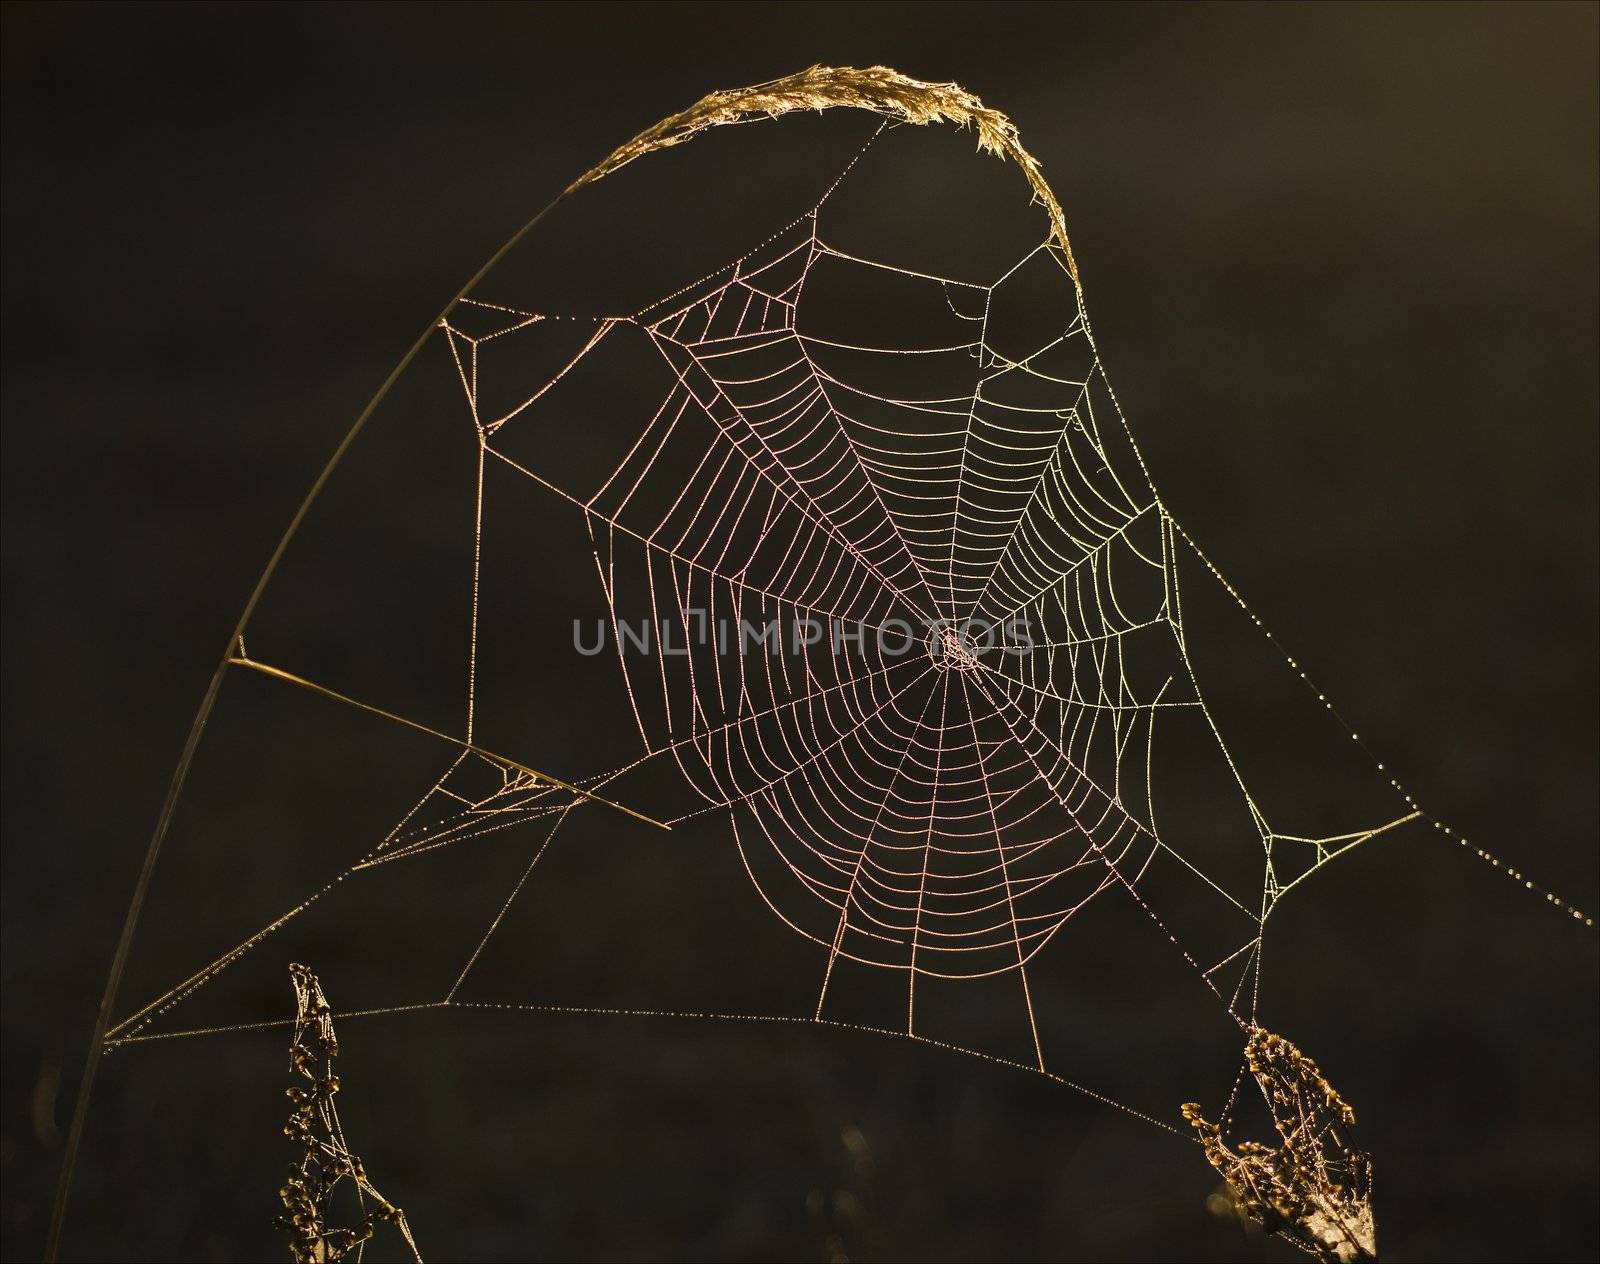 Early in the morning dewdrops on a web were lit by iridescent light.